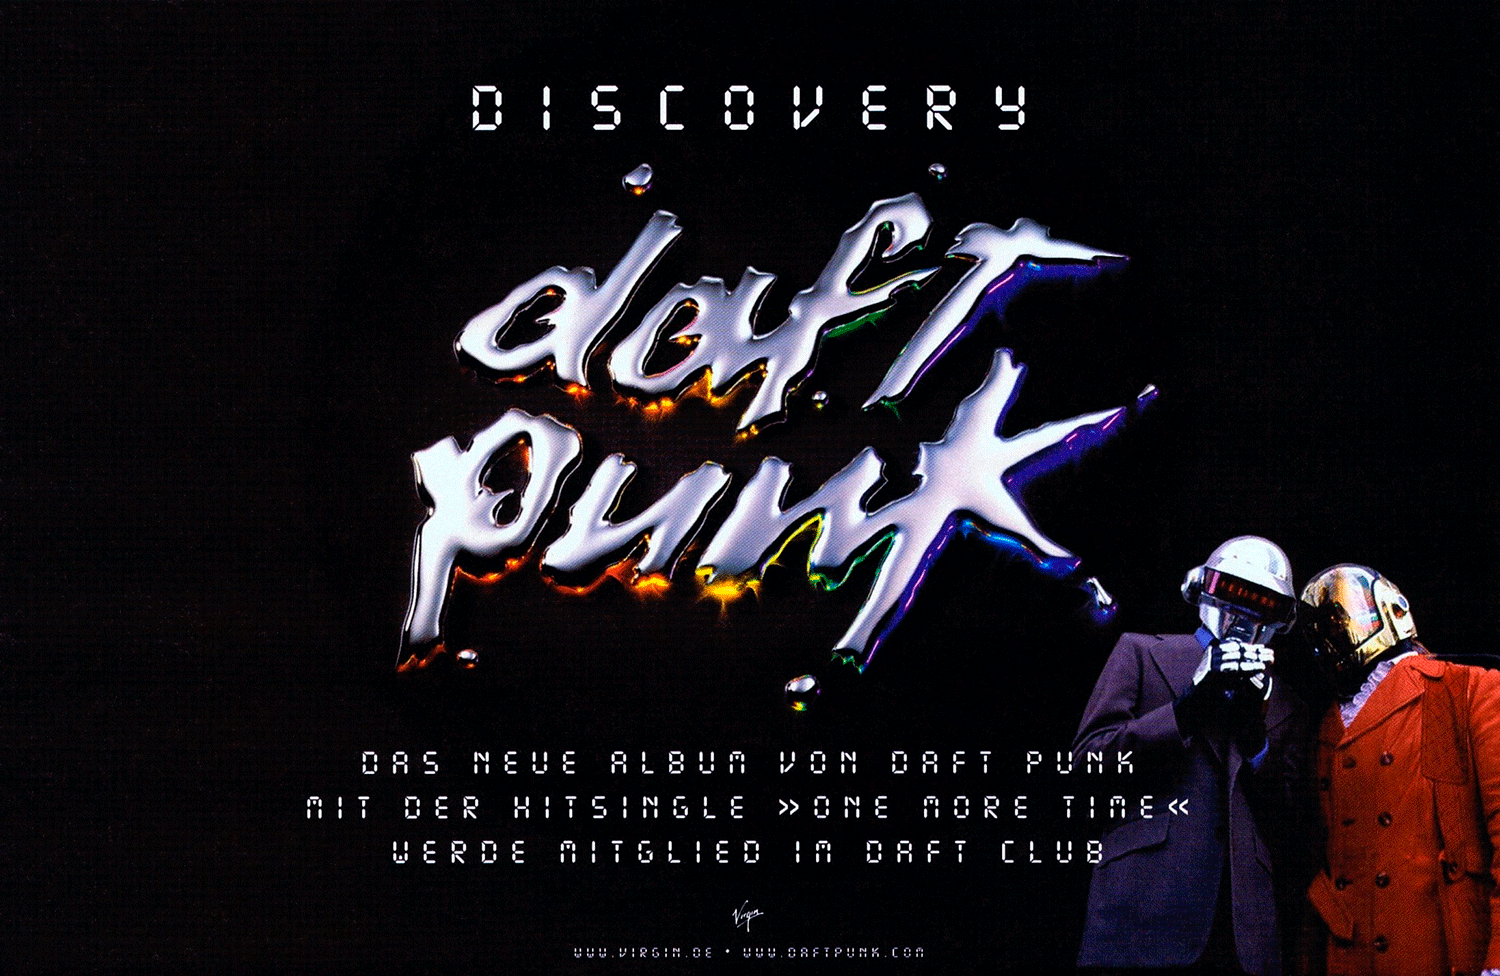 15 Years Since Daft Punk Released “Discovery”